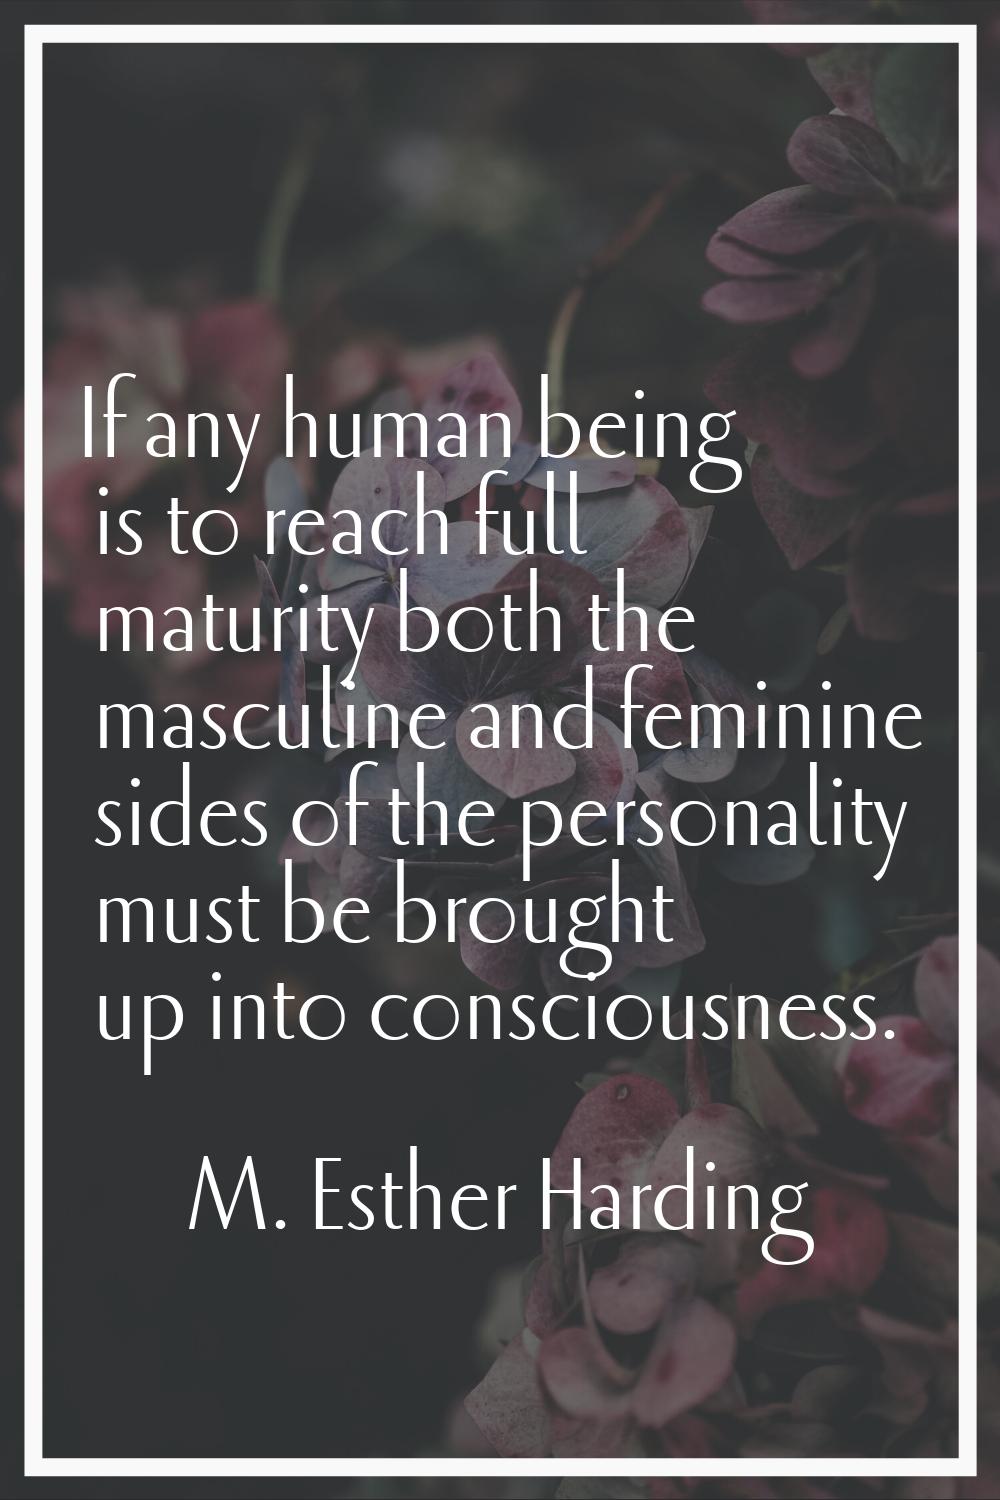 If any human being is to reach full maturity both the masculine and feminine sides of the personali